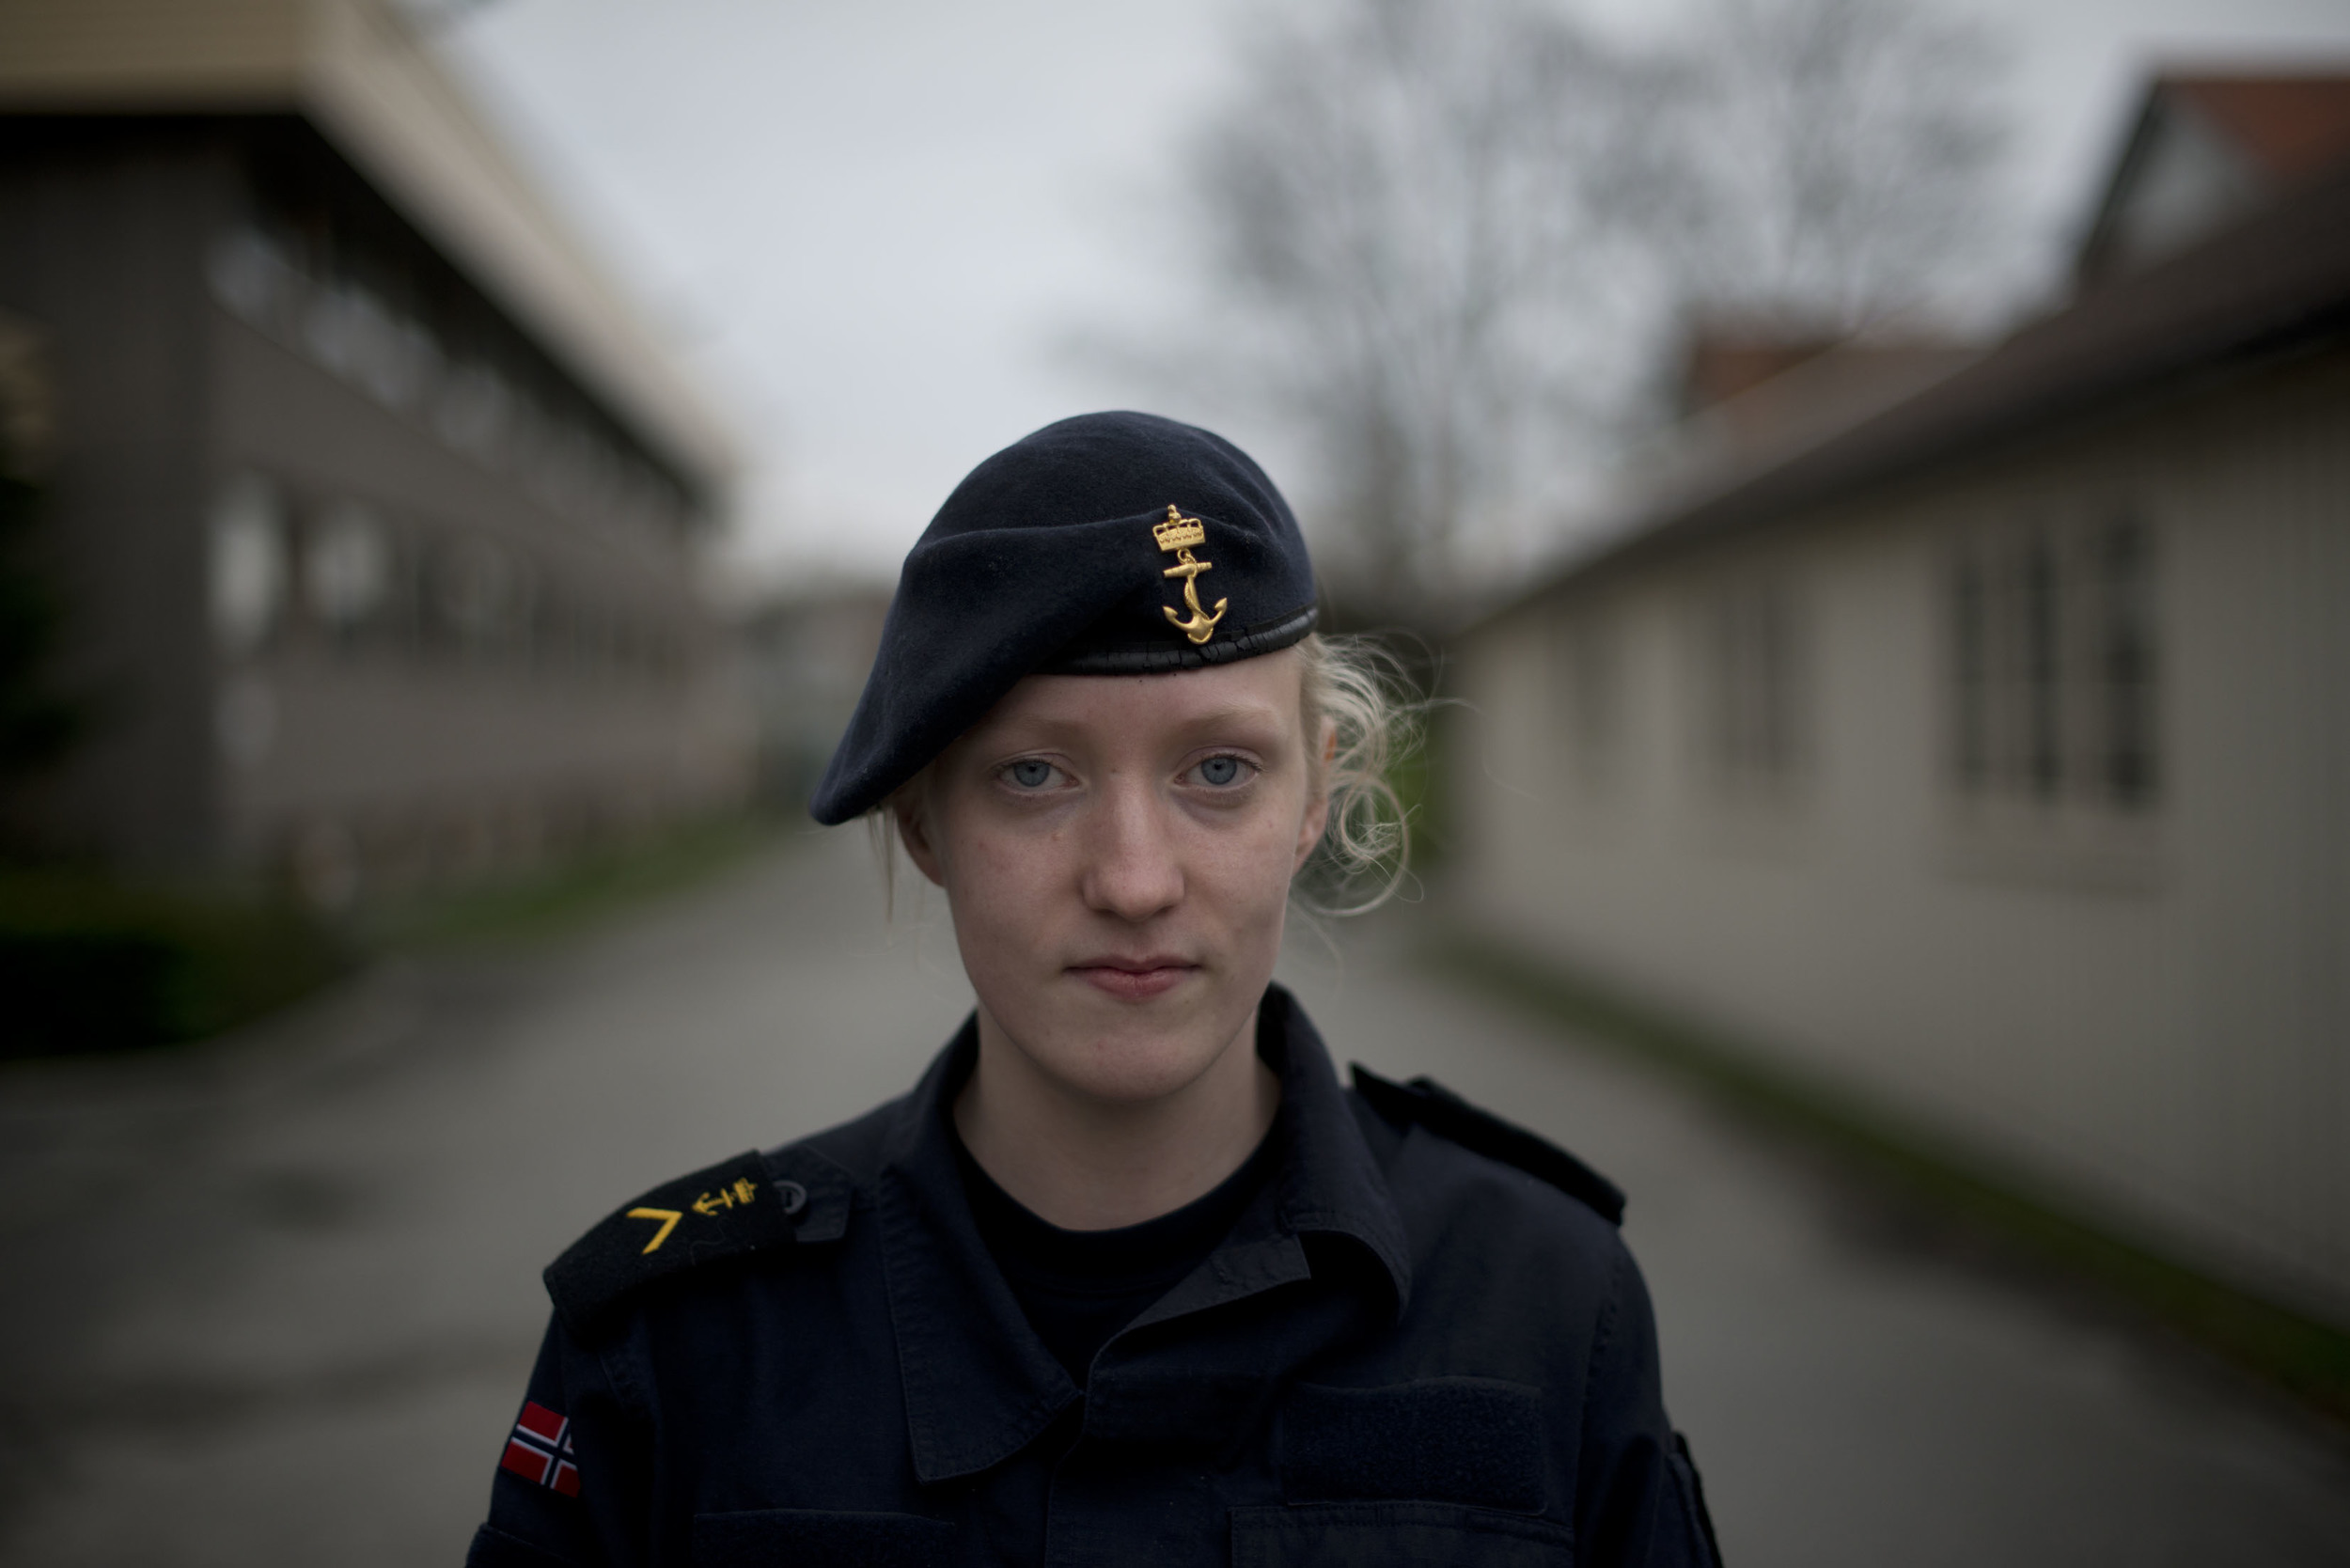  Marita Frafjord is trainee at Fokus, en education center for those conscripted for military service, and people working for the Norwegian Armed Forces. She has to wear uniform at work, has a room in the camp. In the weekends, she drives home to the 